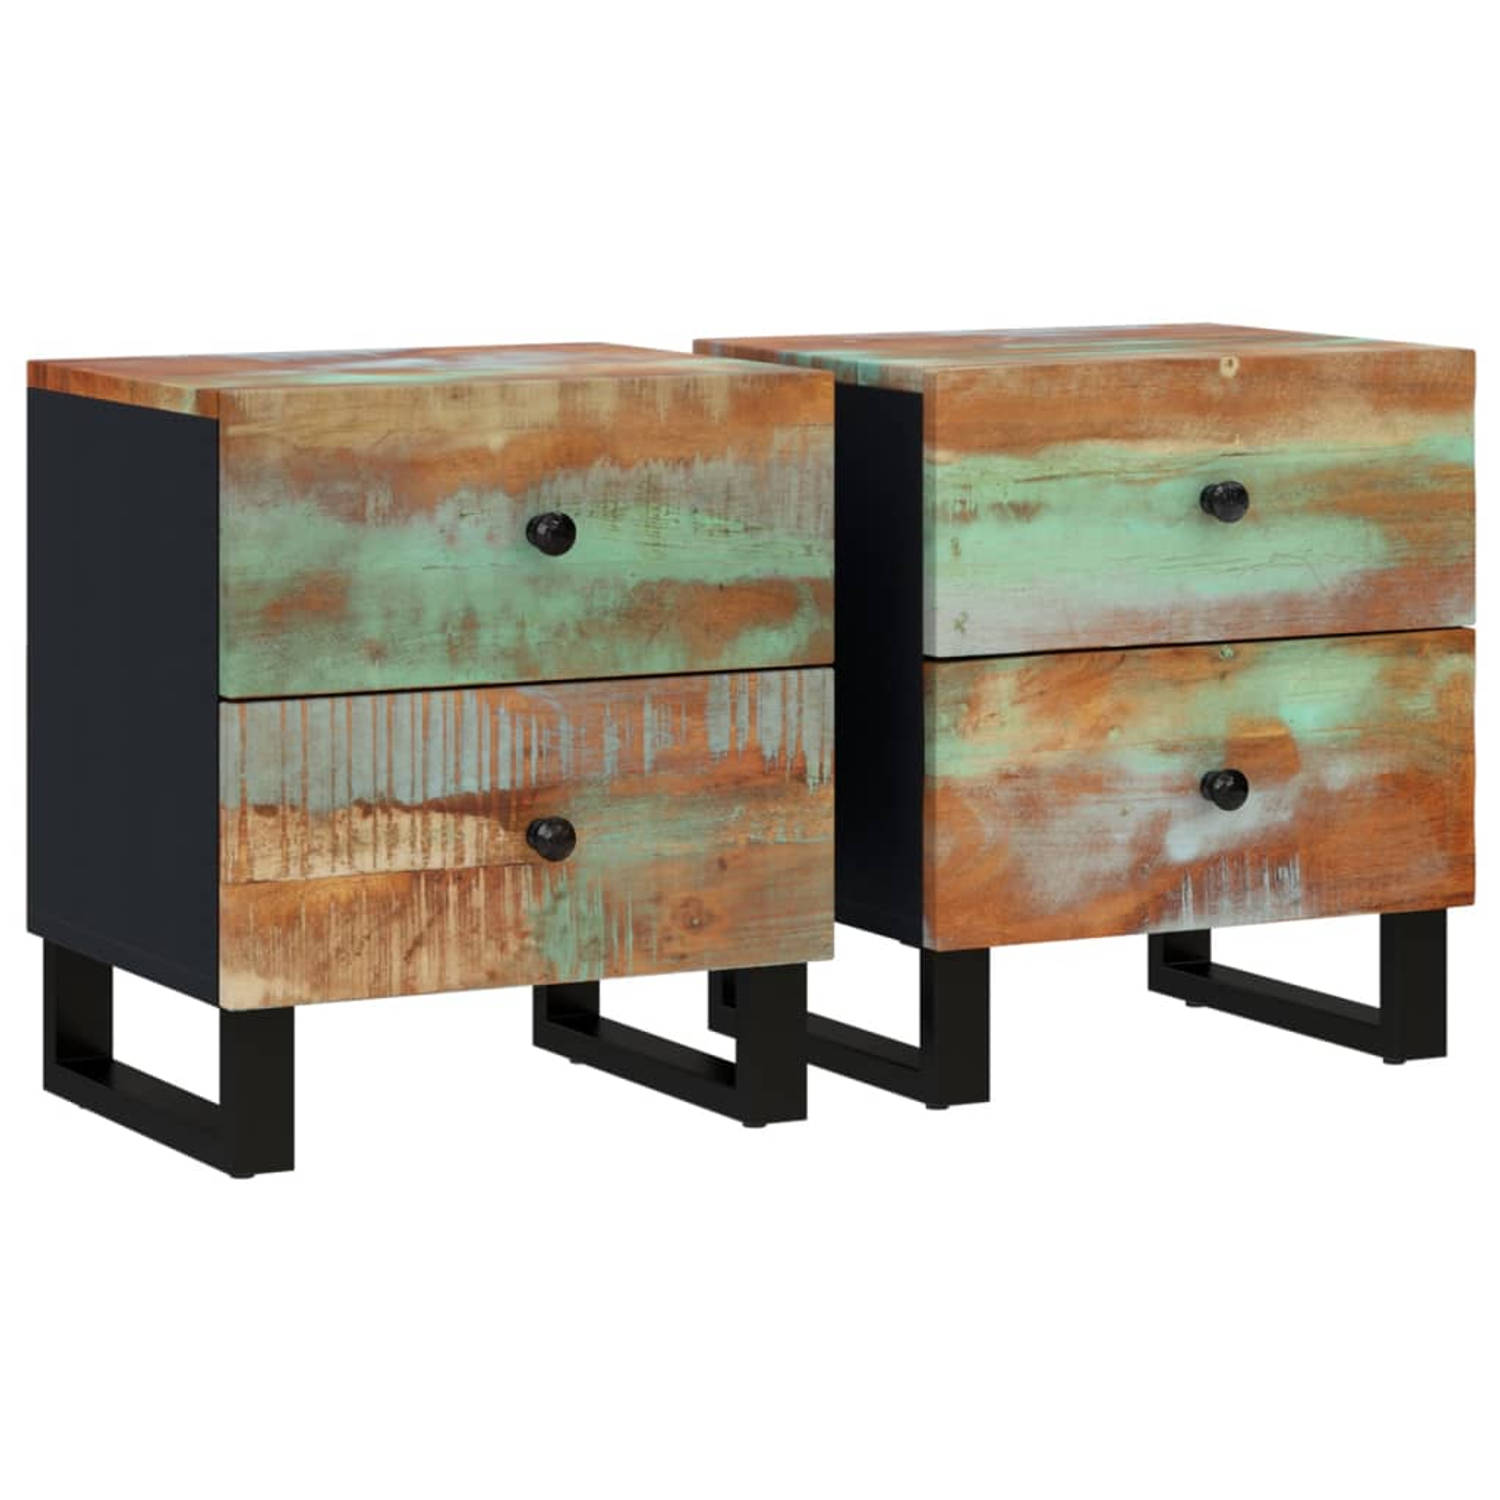 The Living Store Nachtkastjes 2 st 40x33x46 cm massief gerecycled hout - Kast